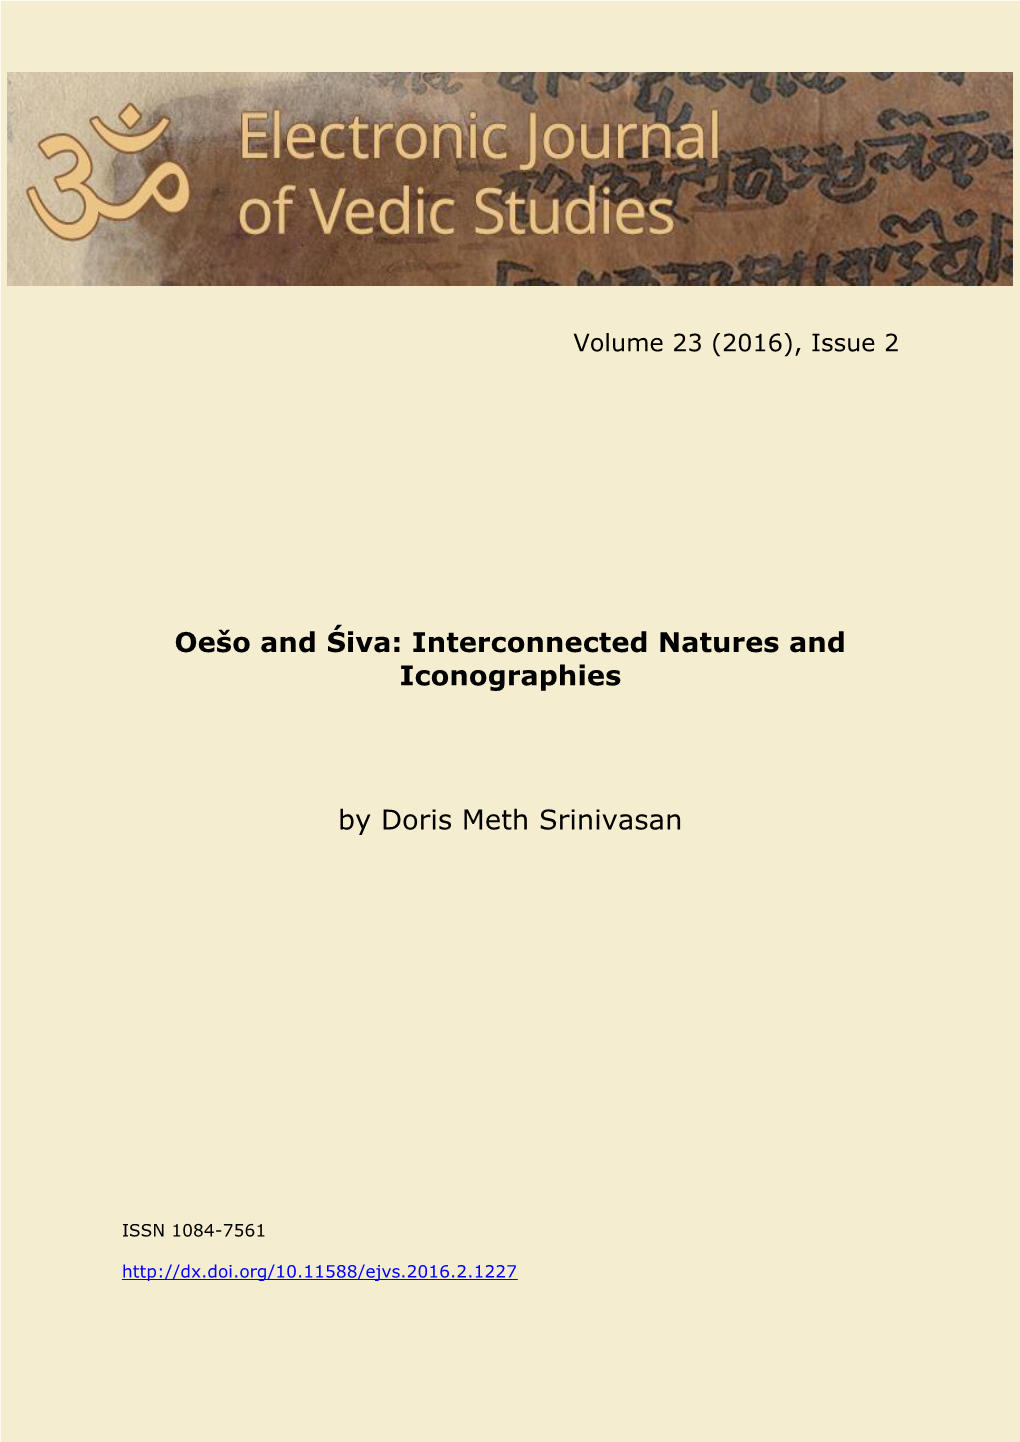 Oešo and Śiva: Interconnected Natures and Iconographies by Doris Meth Srinivasan